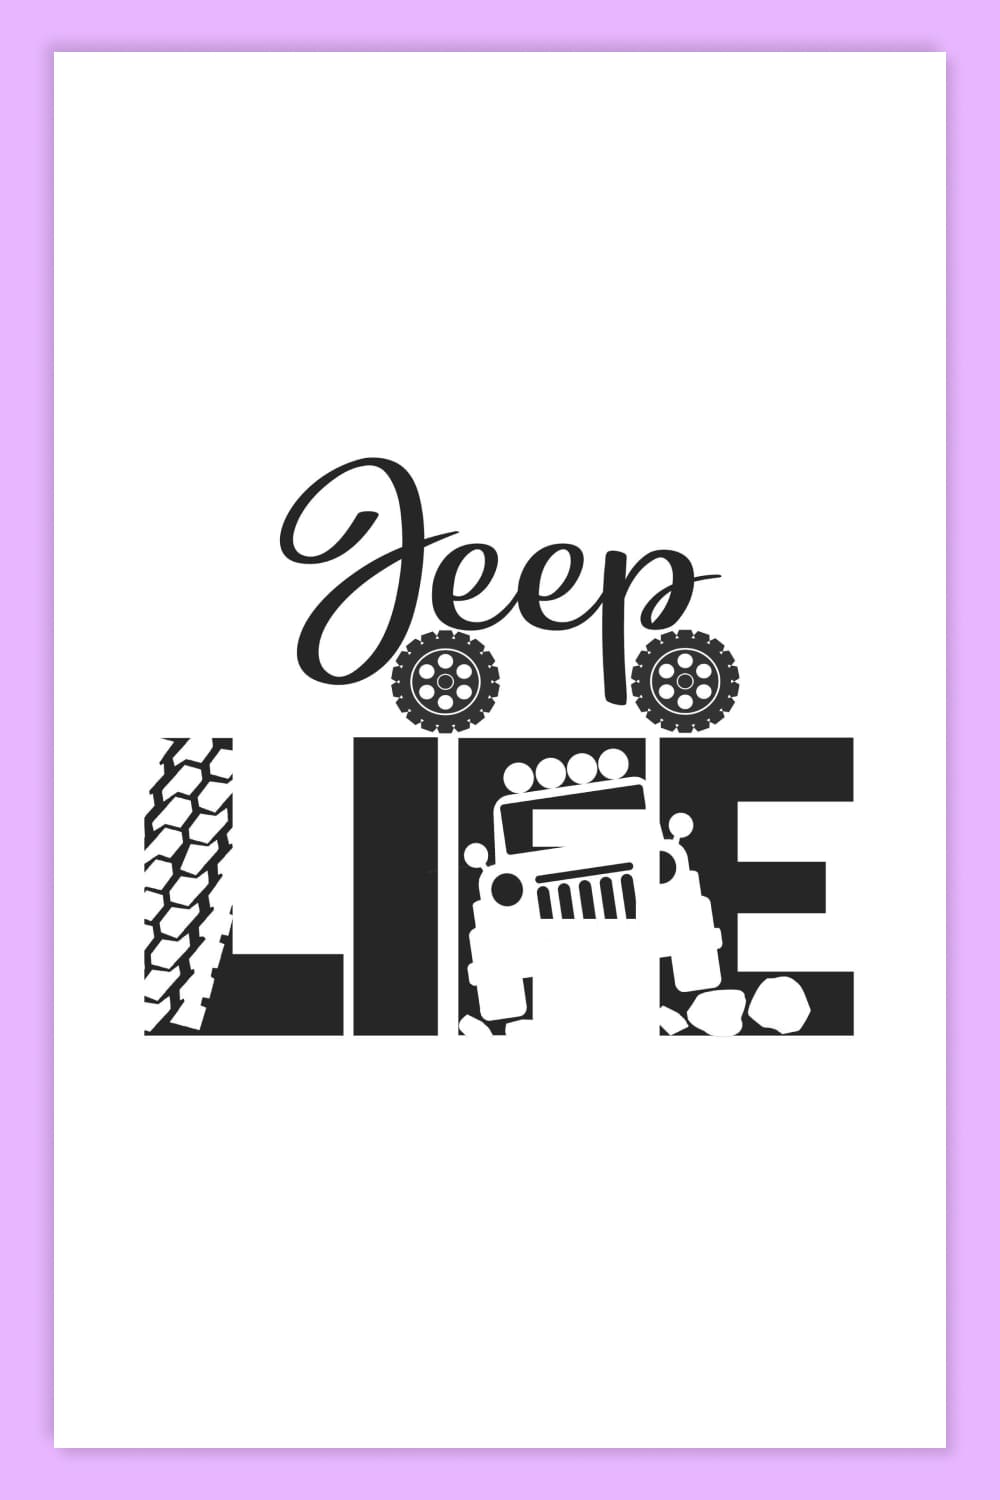 Word Life written with tread track silhouette and full face of Jeep Wrangler.